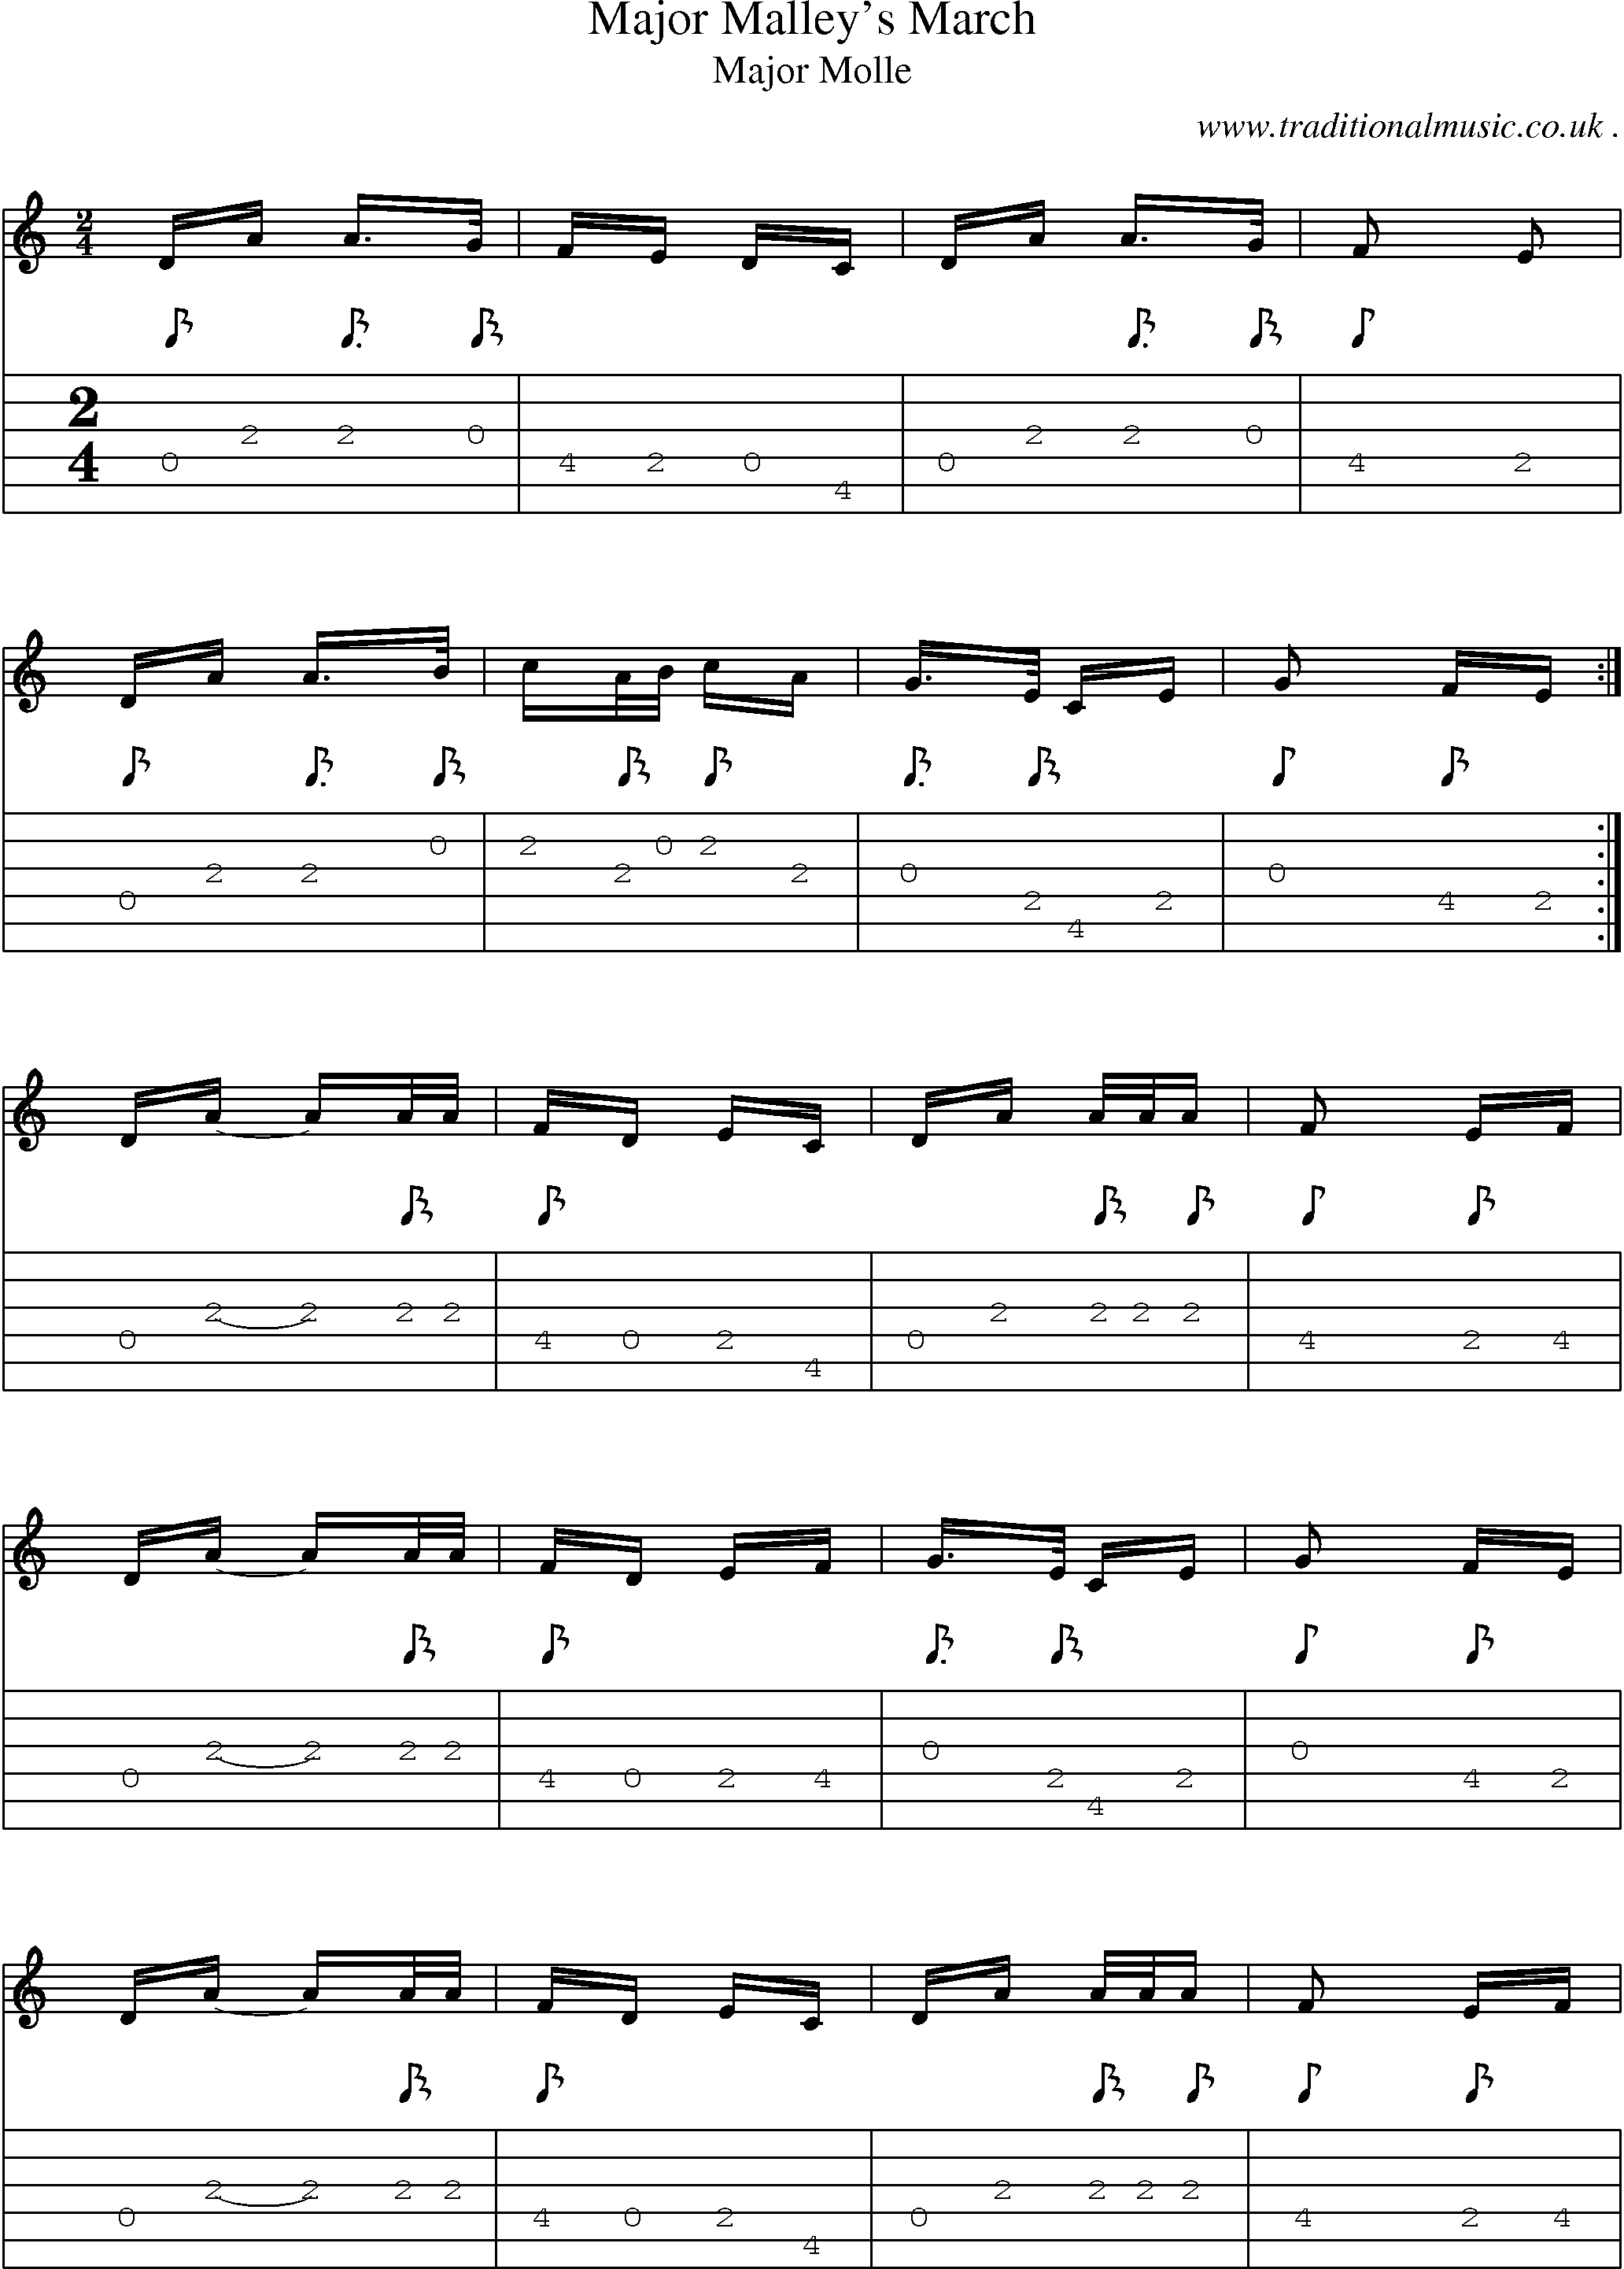 Sheet-music  score, Chords and Guitar Tabs for Major Malleys March